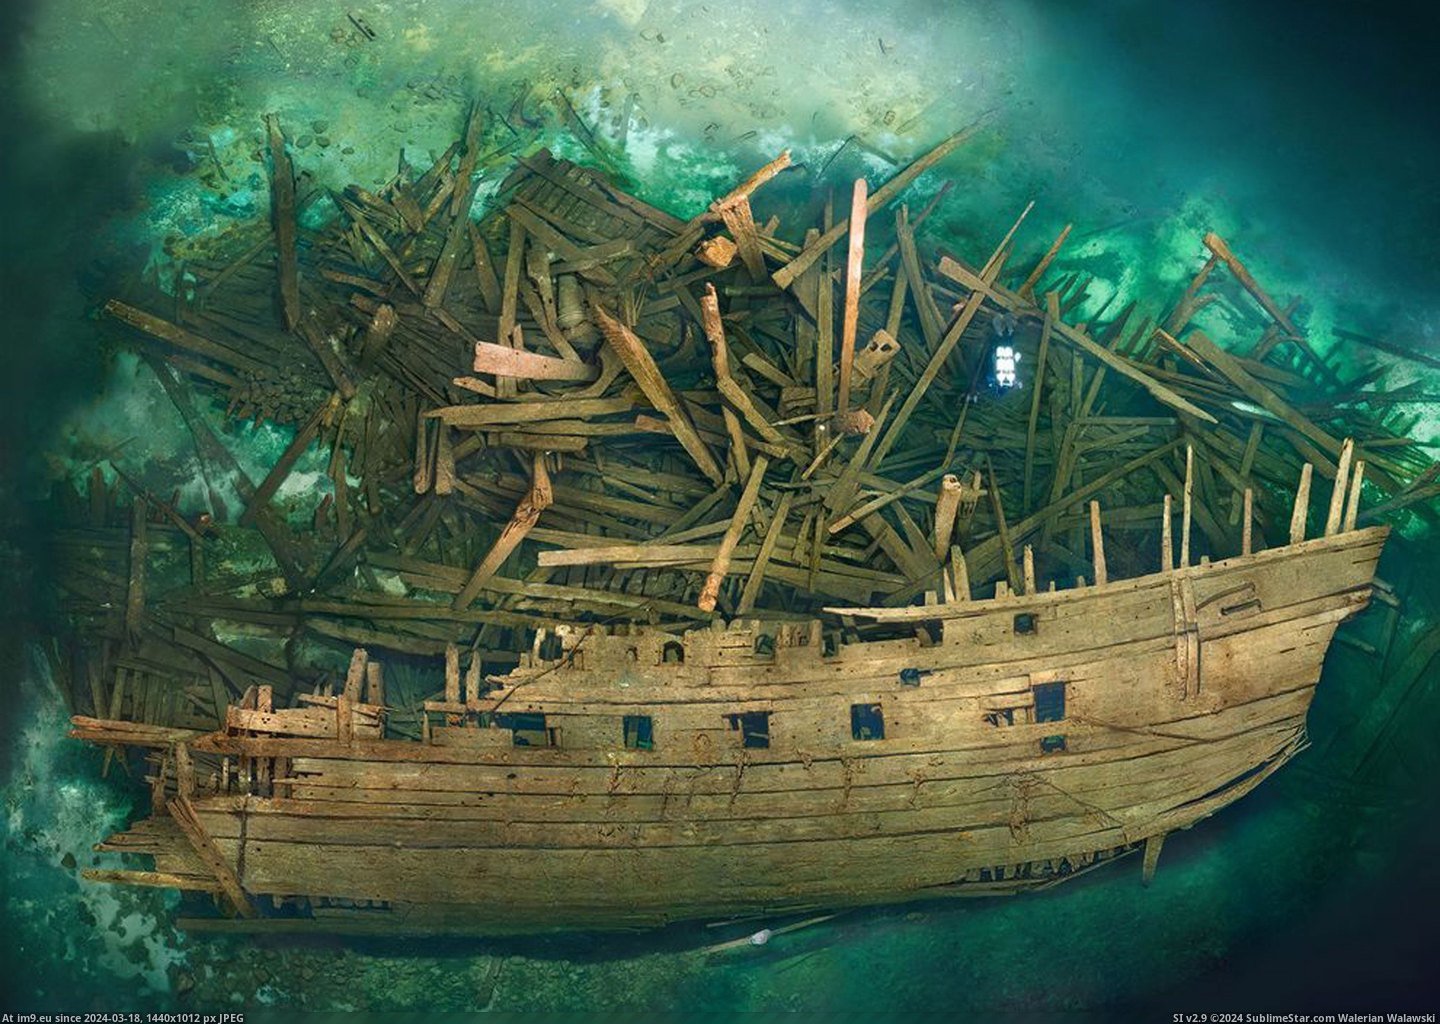 #Years #Pretty #Battle #Exploded #Wreck #Preserved #Warship #Land #Mars #Swedish [Pics] Wreck of the Swedish warship Mars, which exploded during the first battle of Öland. Pretty well preserved for 500 years u Pic. (Изображение из альбом My r/PICS favs))